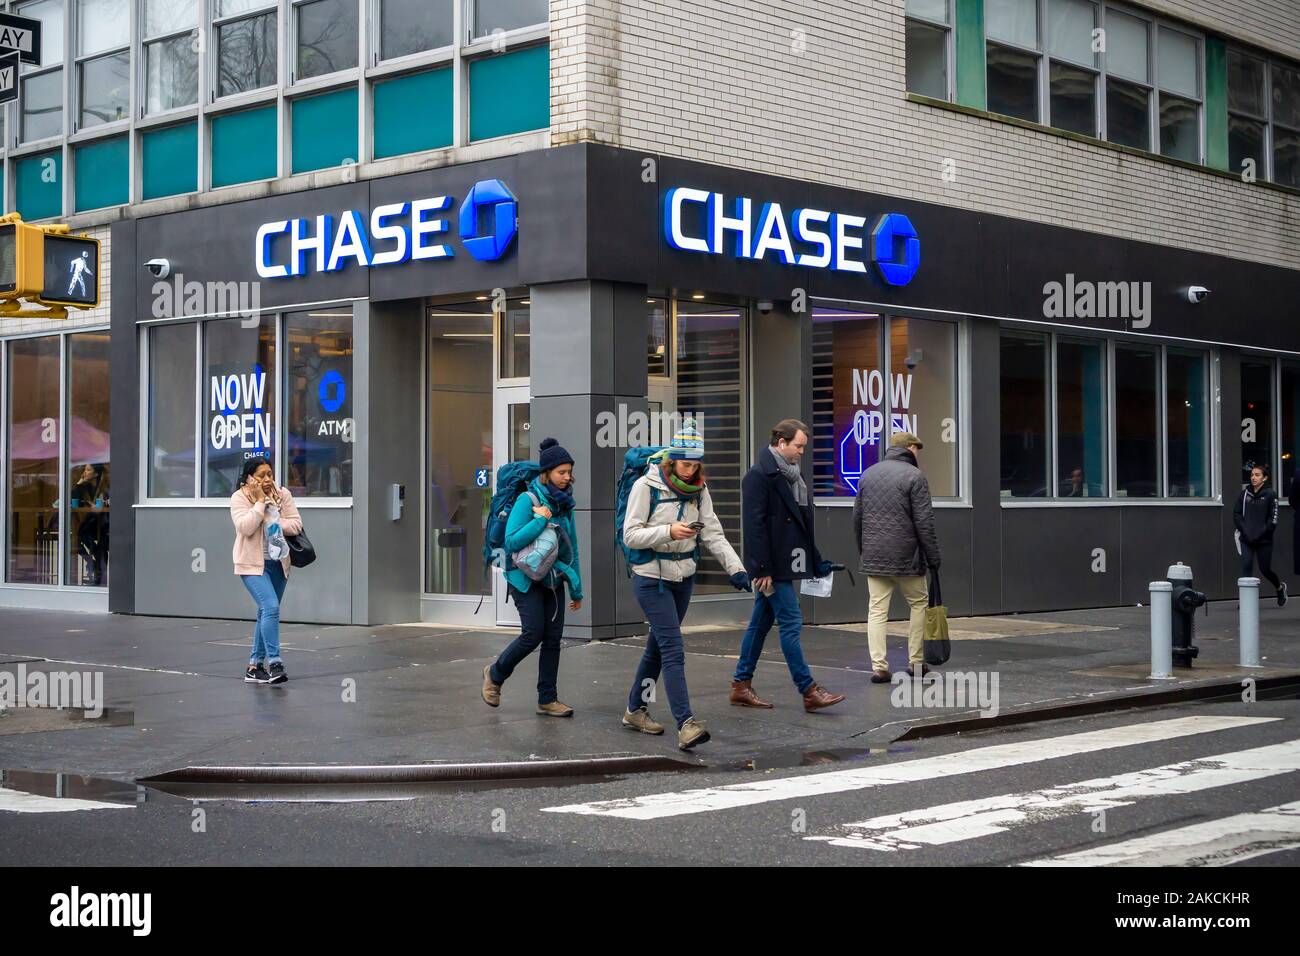 A newly opened branch of JPMorgan Chase bank in New York on Saturday